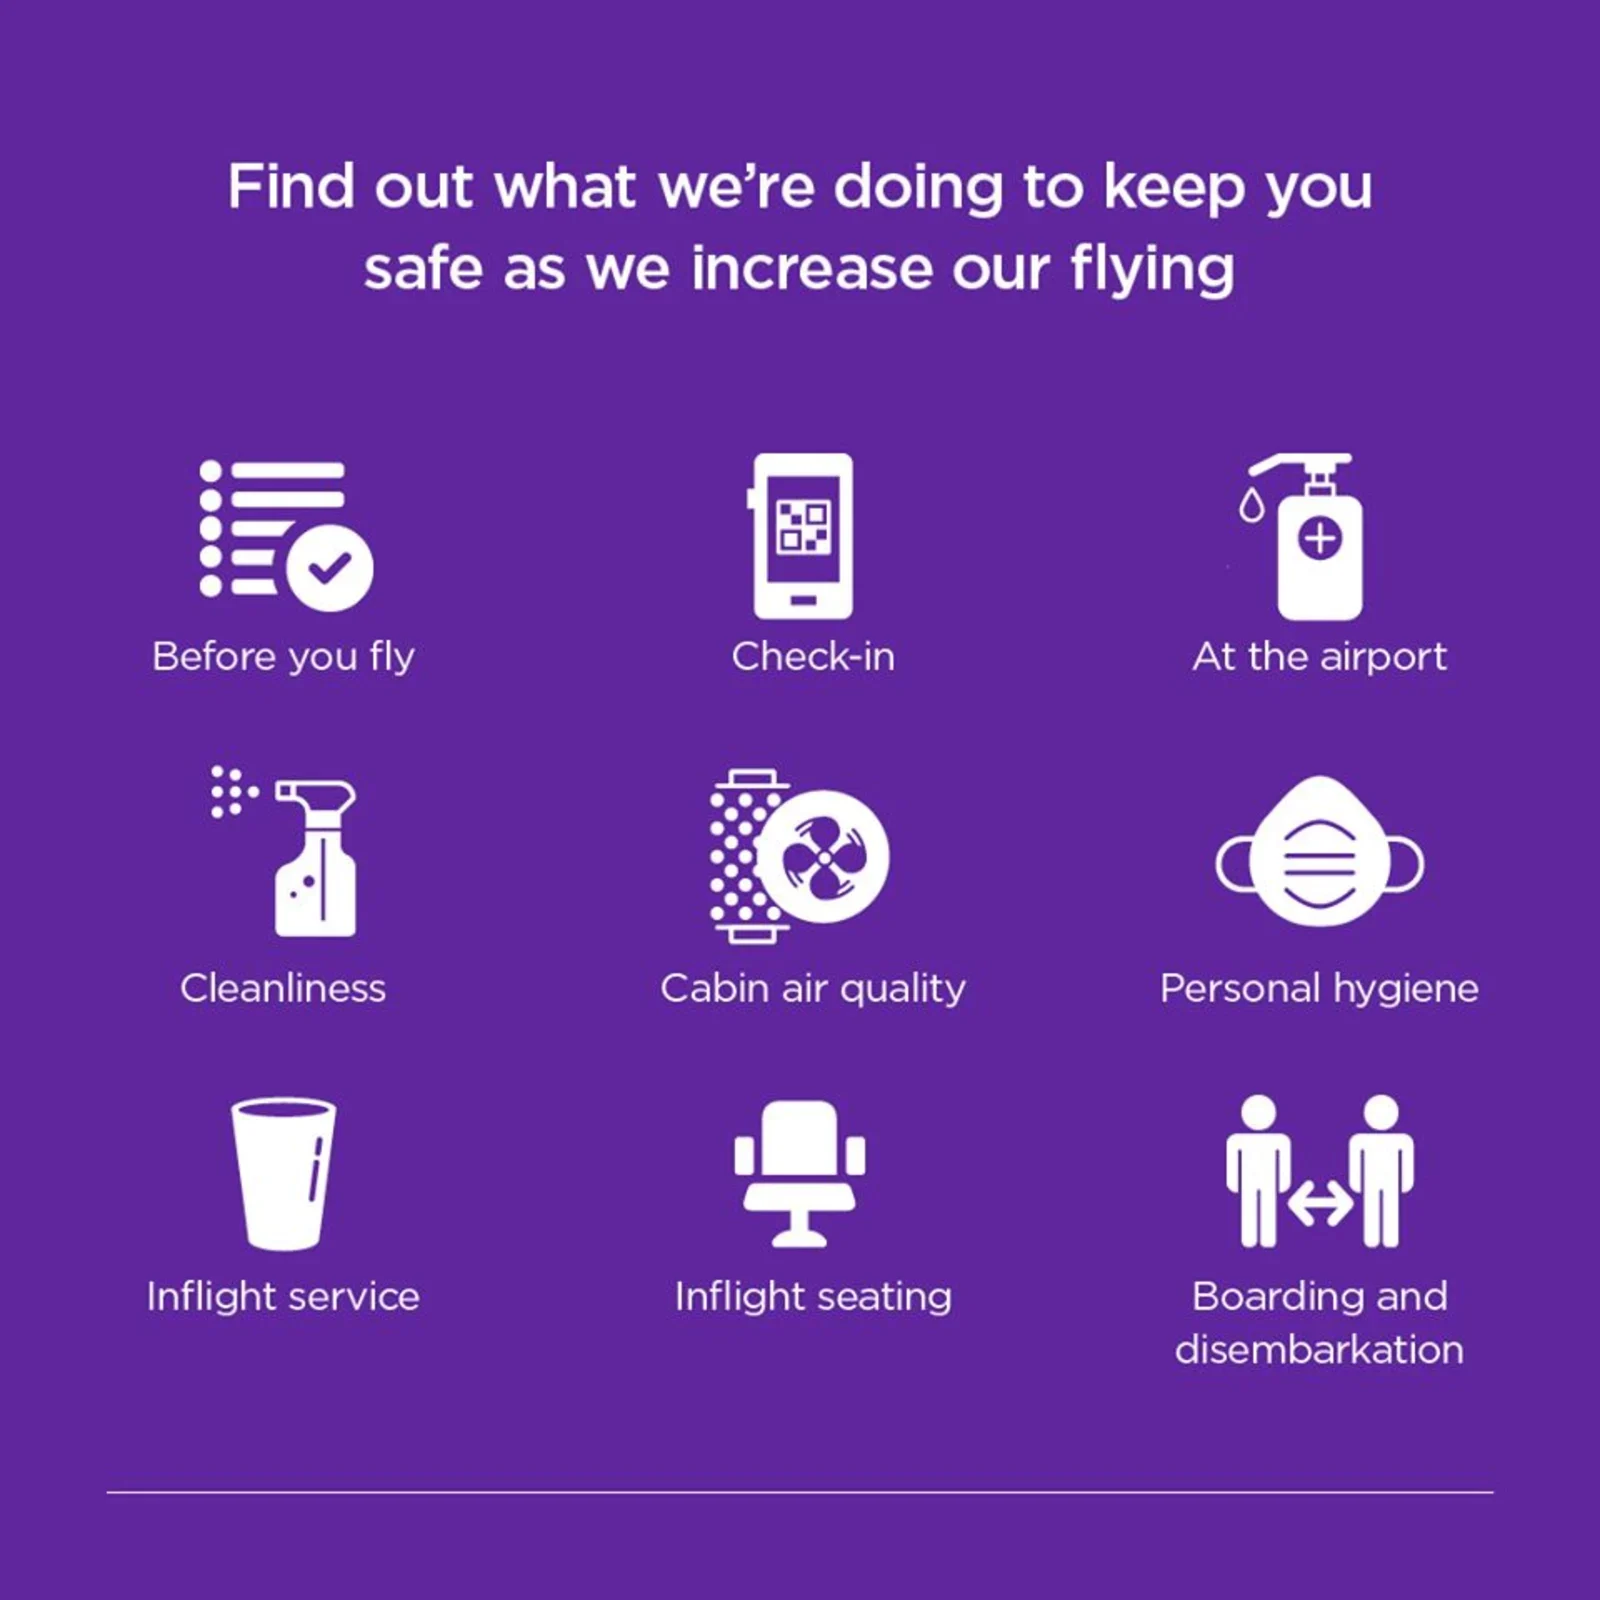 A list of actions Virgin Australia is taking to keep passengers health and safe during COVID-19